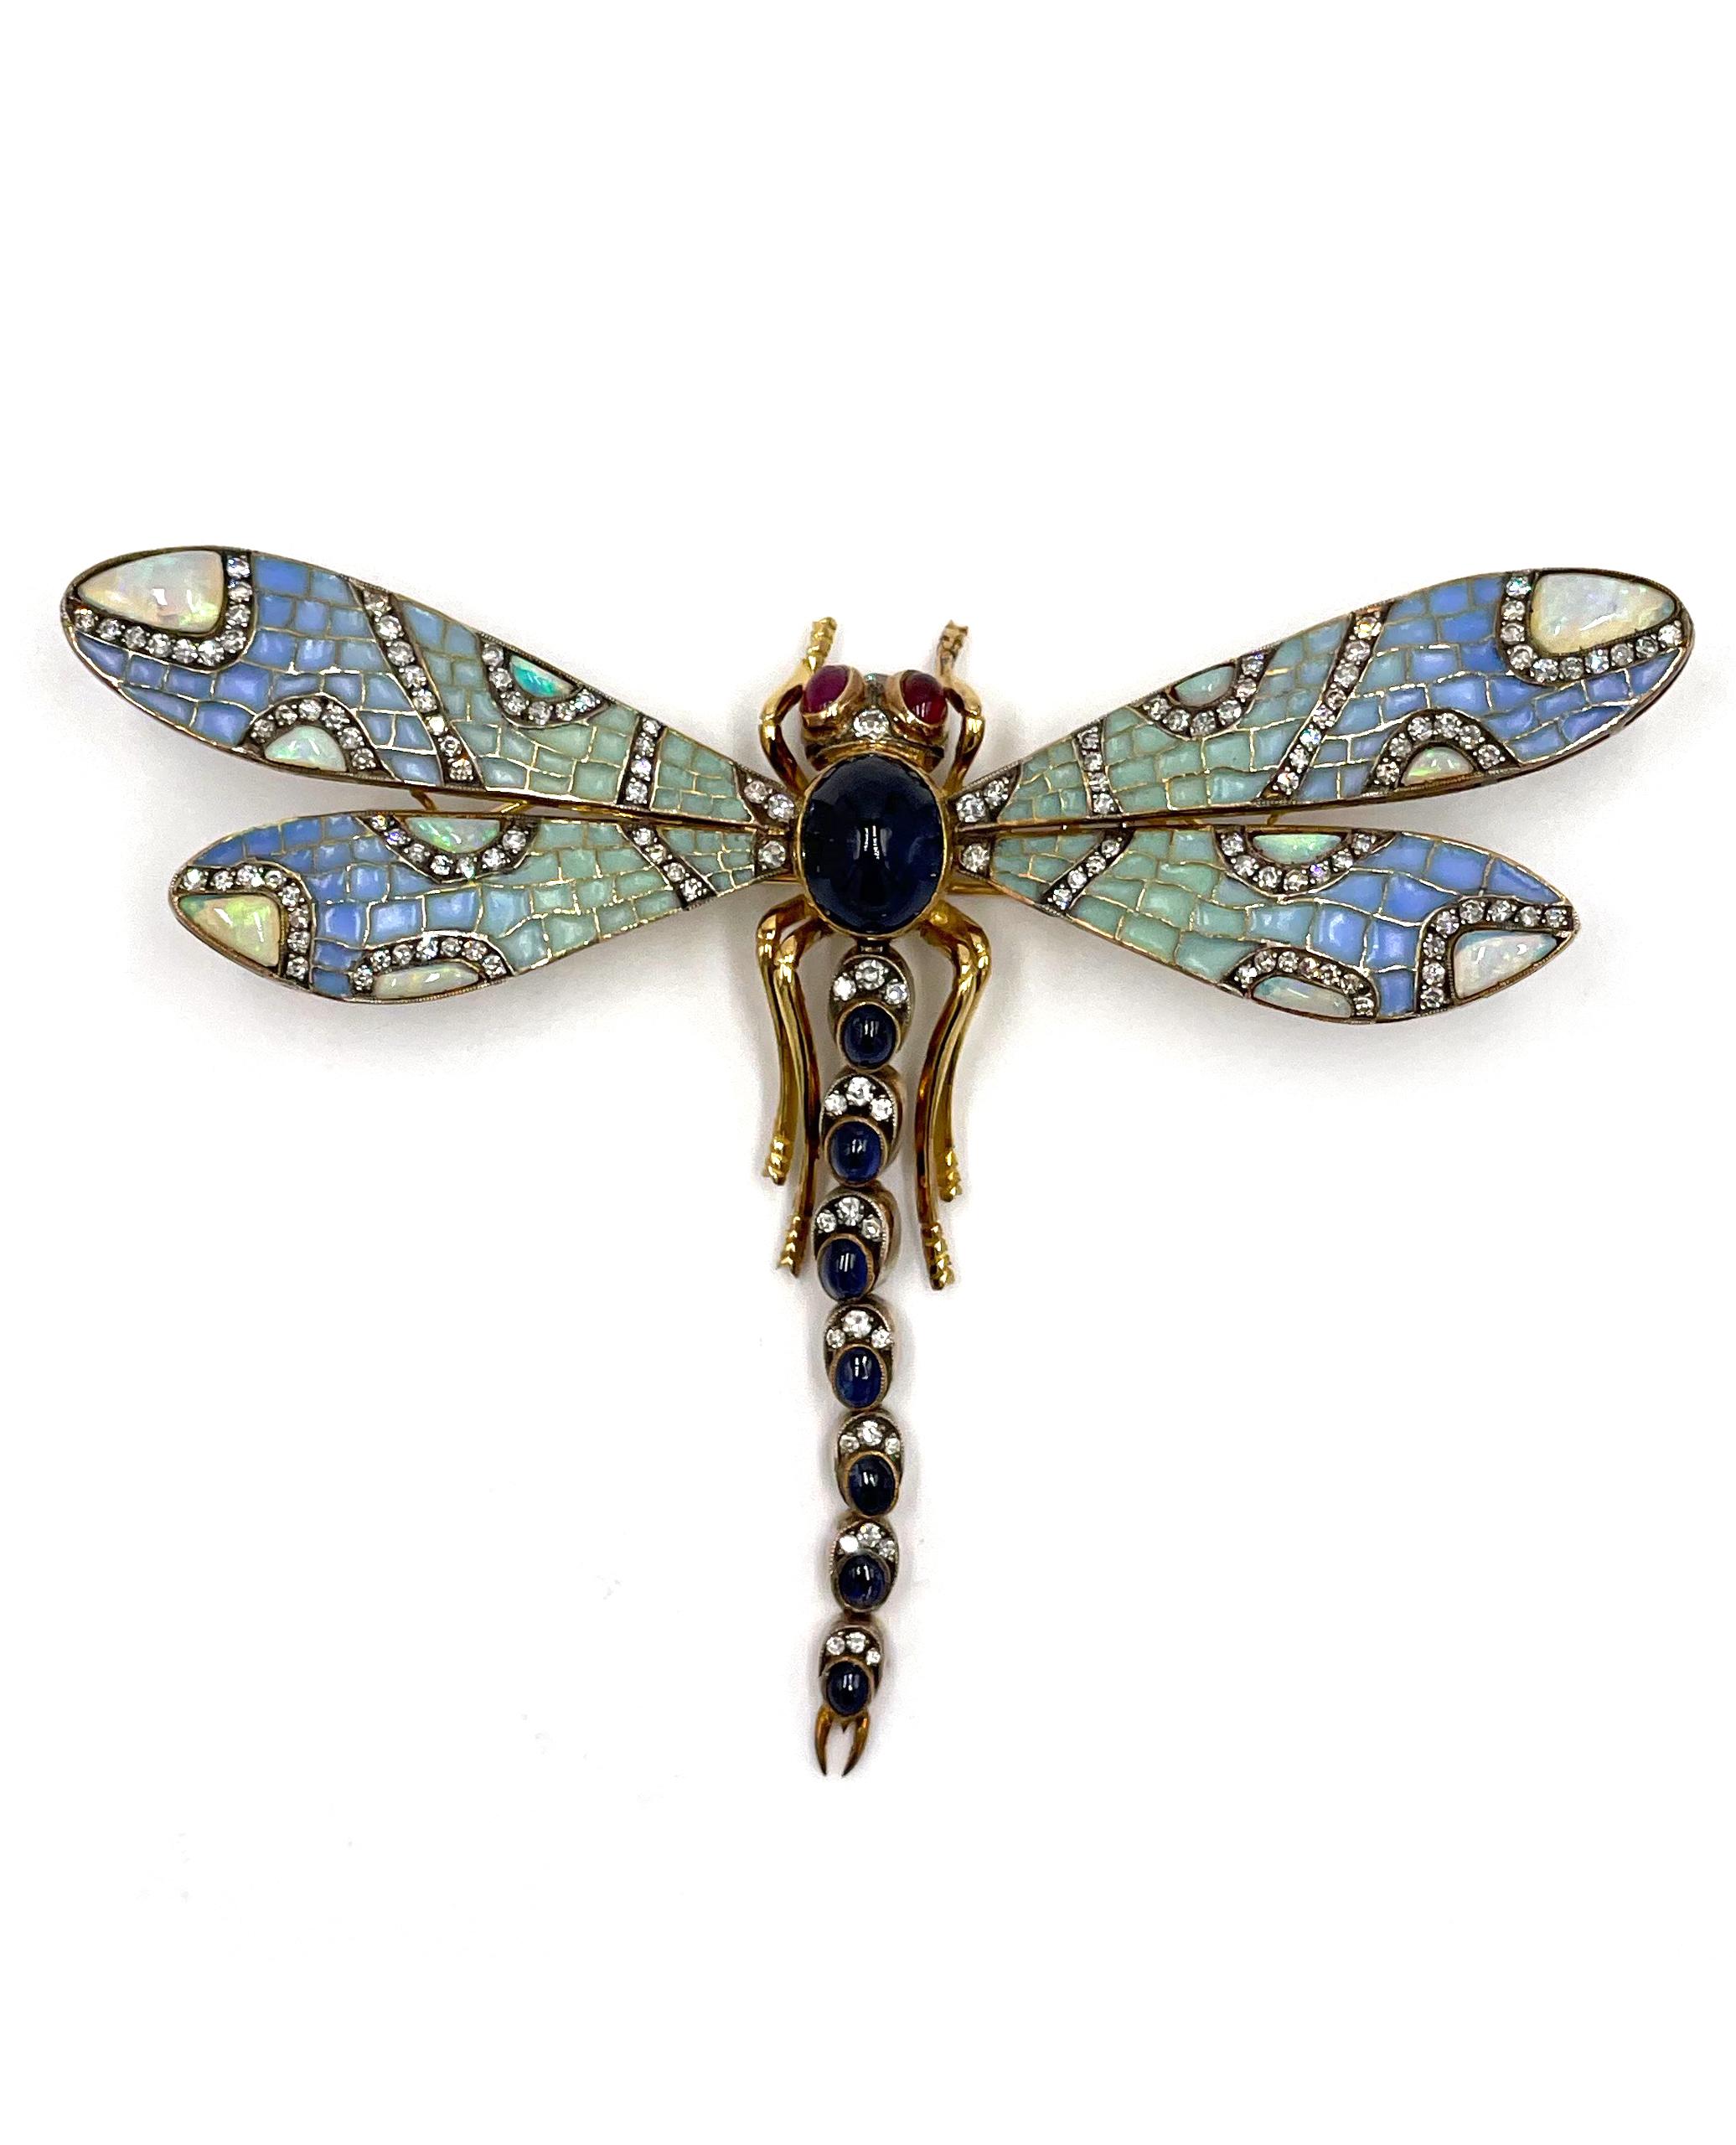 Antique, circa 1880-1910, 18K yellow gold and silver handmade dragonfly brooch/pendant slide with sapphire, opal, ruby and diamond.

The plique-a-jour wings are pale blue/green enamel and set with 12 opals.  The veins in the wings are silver, set